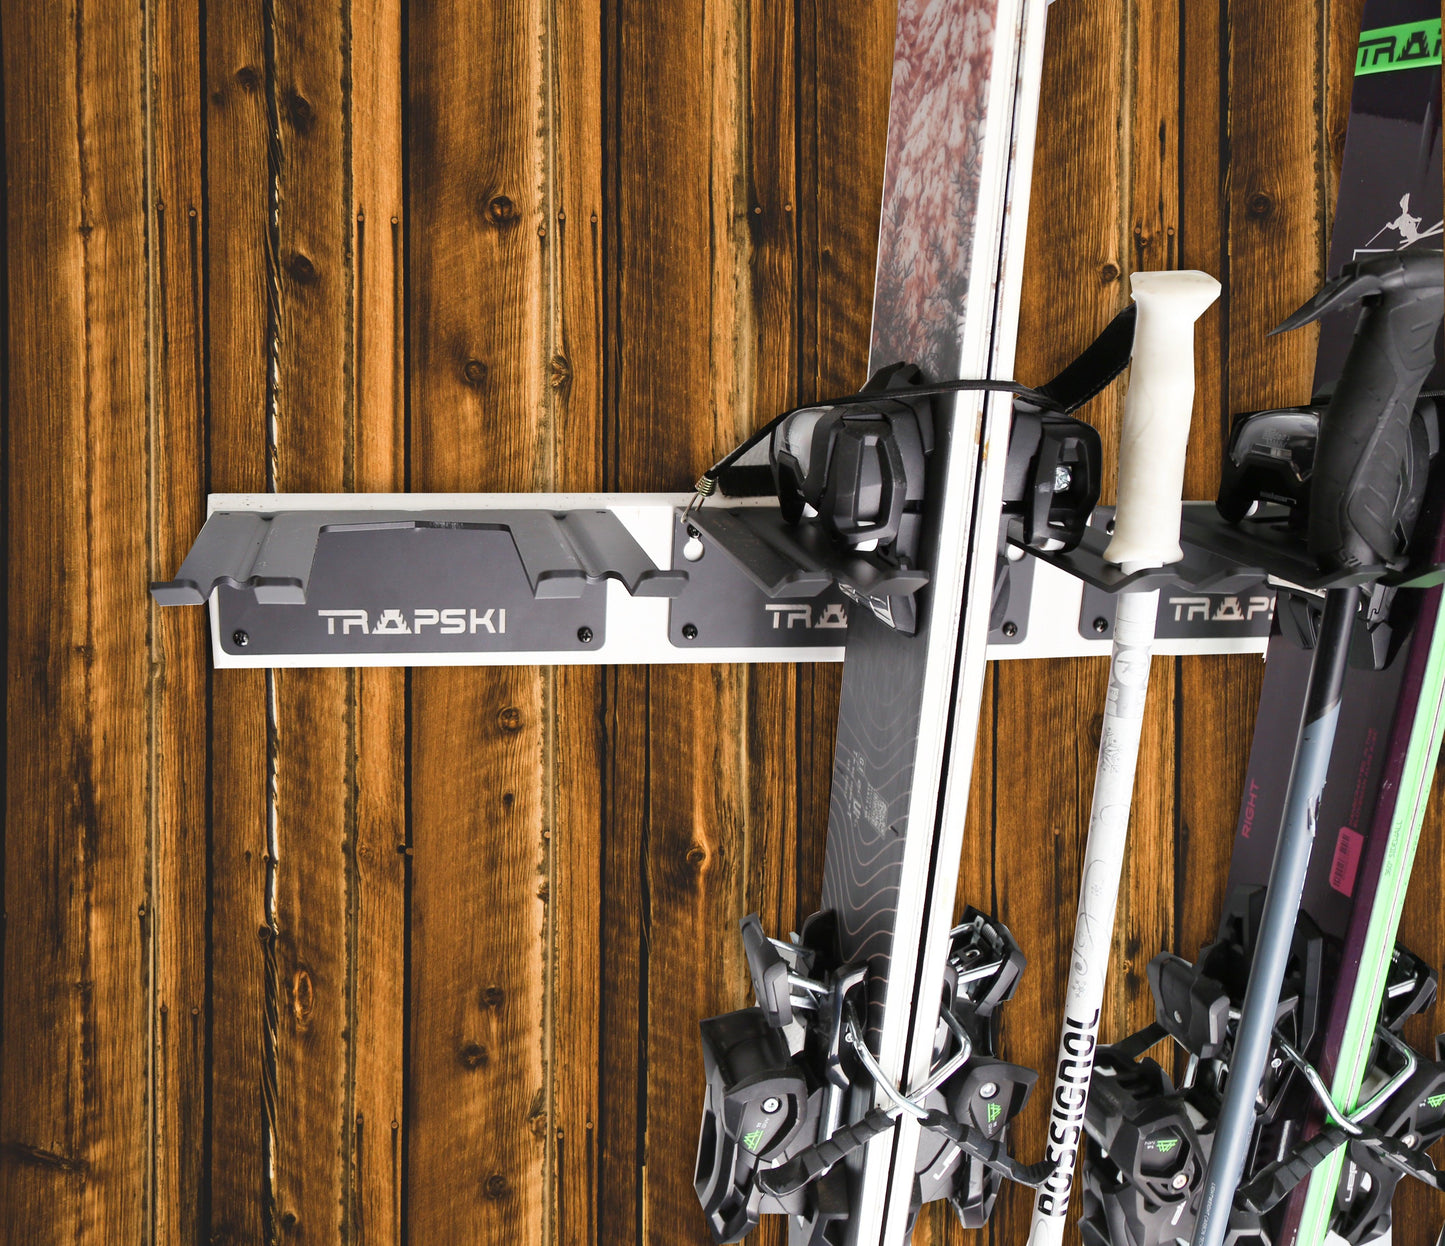 TRAPAWAY Wall Rack | Garage Organizer for Yard Tools, Gear & Equipment | Holds Skis or Snowboard by Bindings | Aluminum | No Moving Parts to break or pinch | Made in the USA - TRAPSKI, LLC